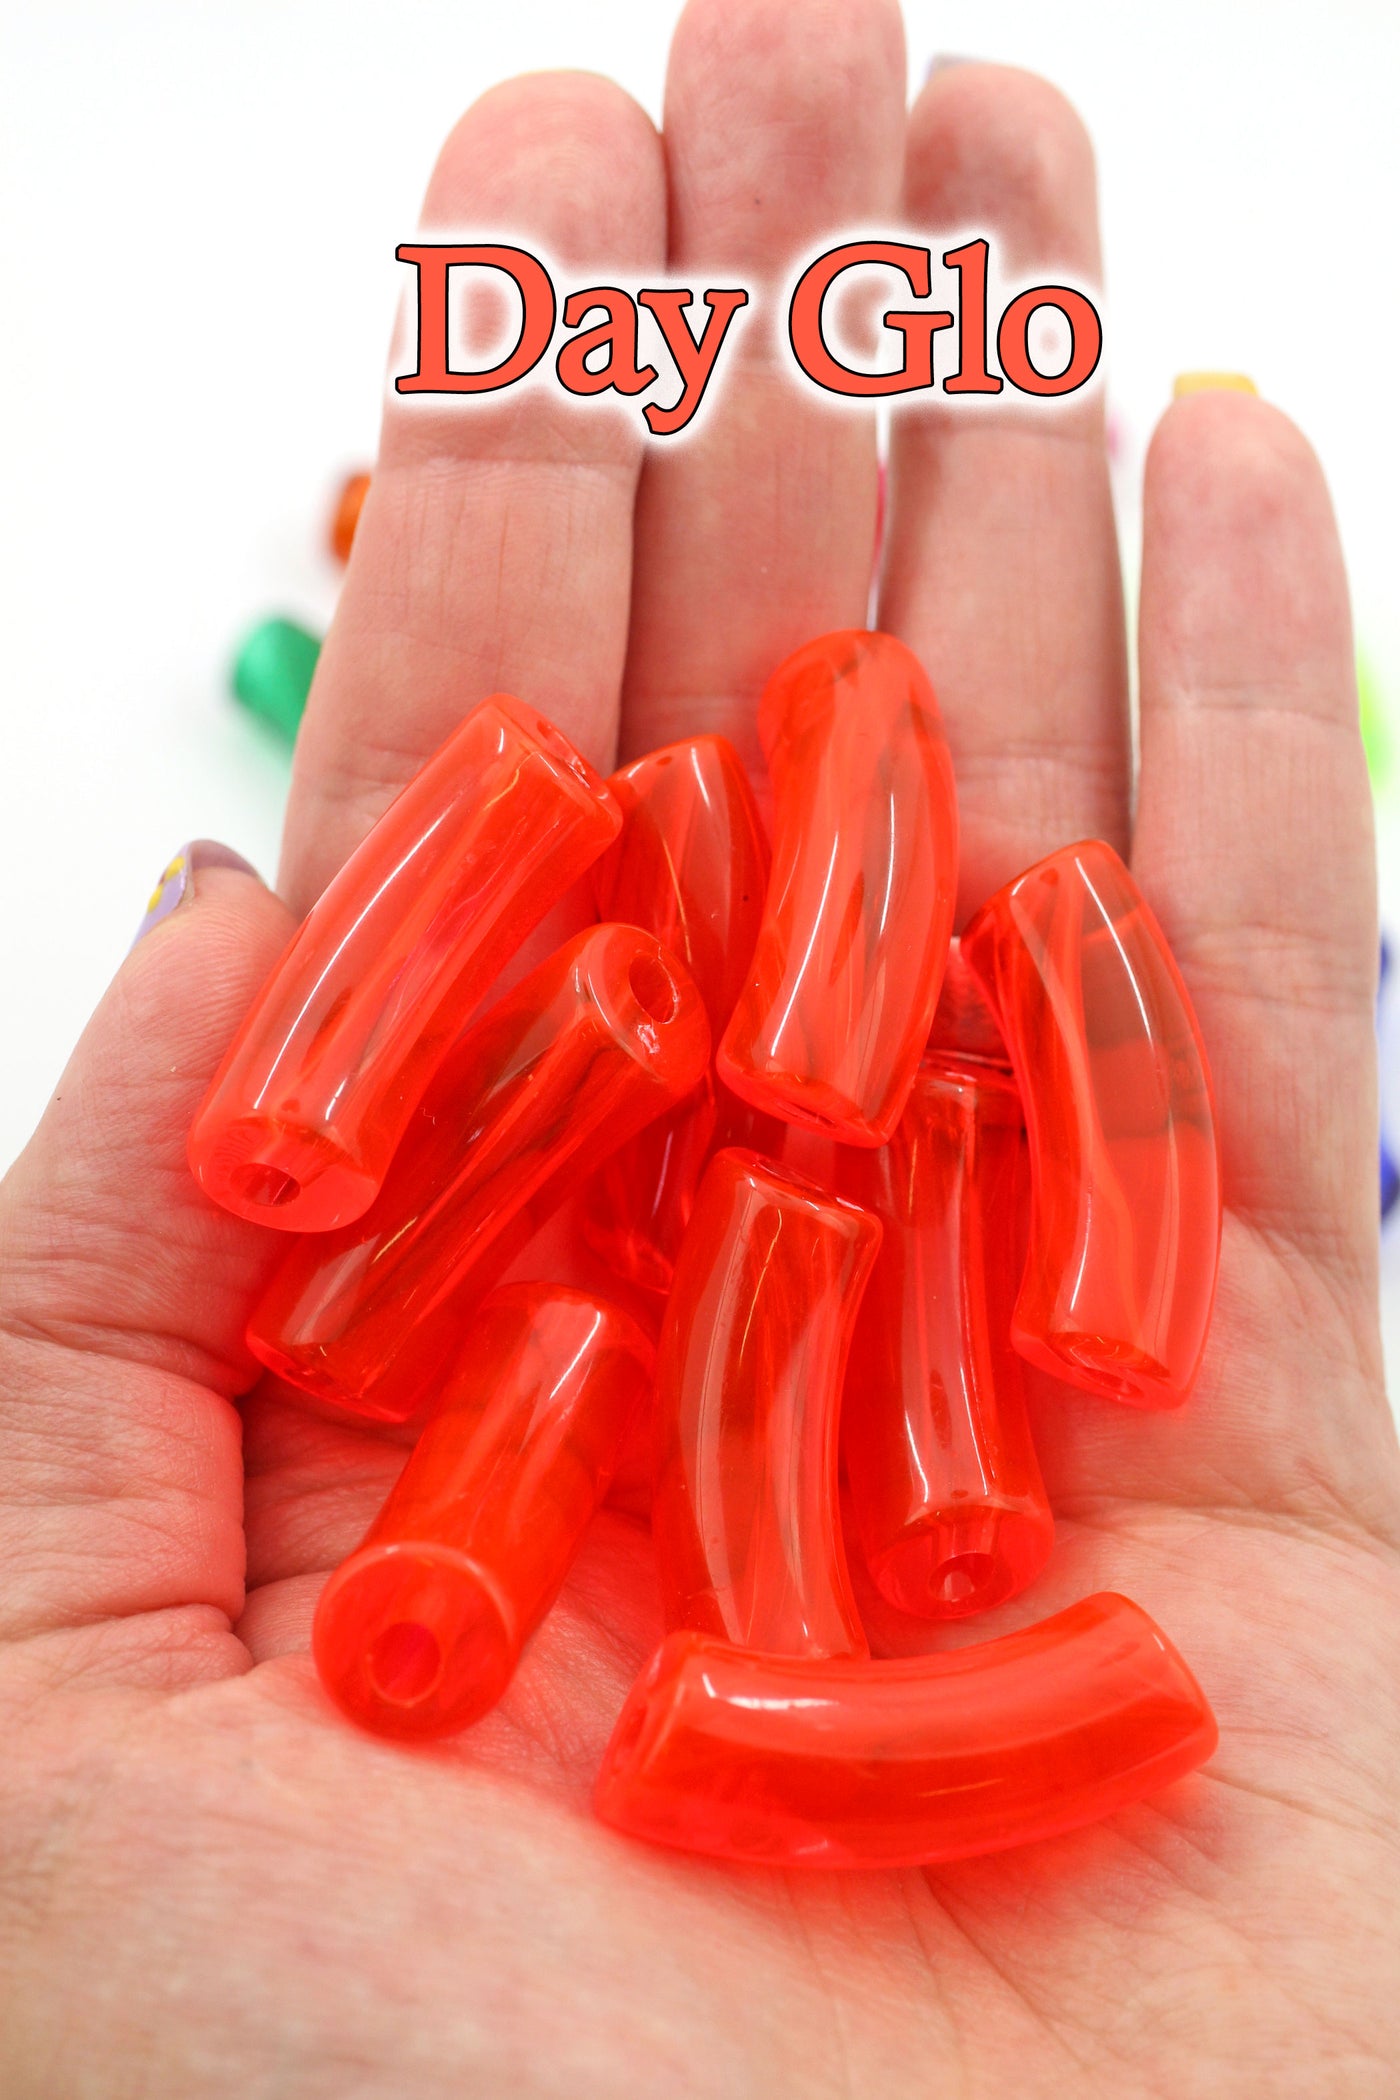 Acrylic Bamboo Beads, Curved Tube Beads, 12mm, Wholesale pricing, for making easy summer bracelets